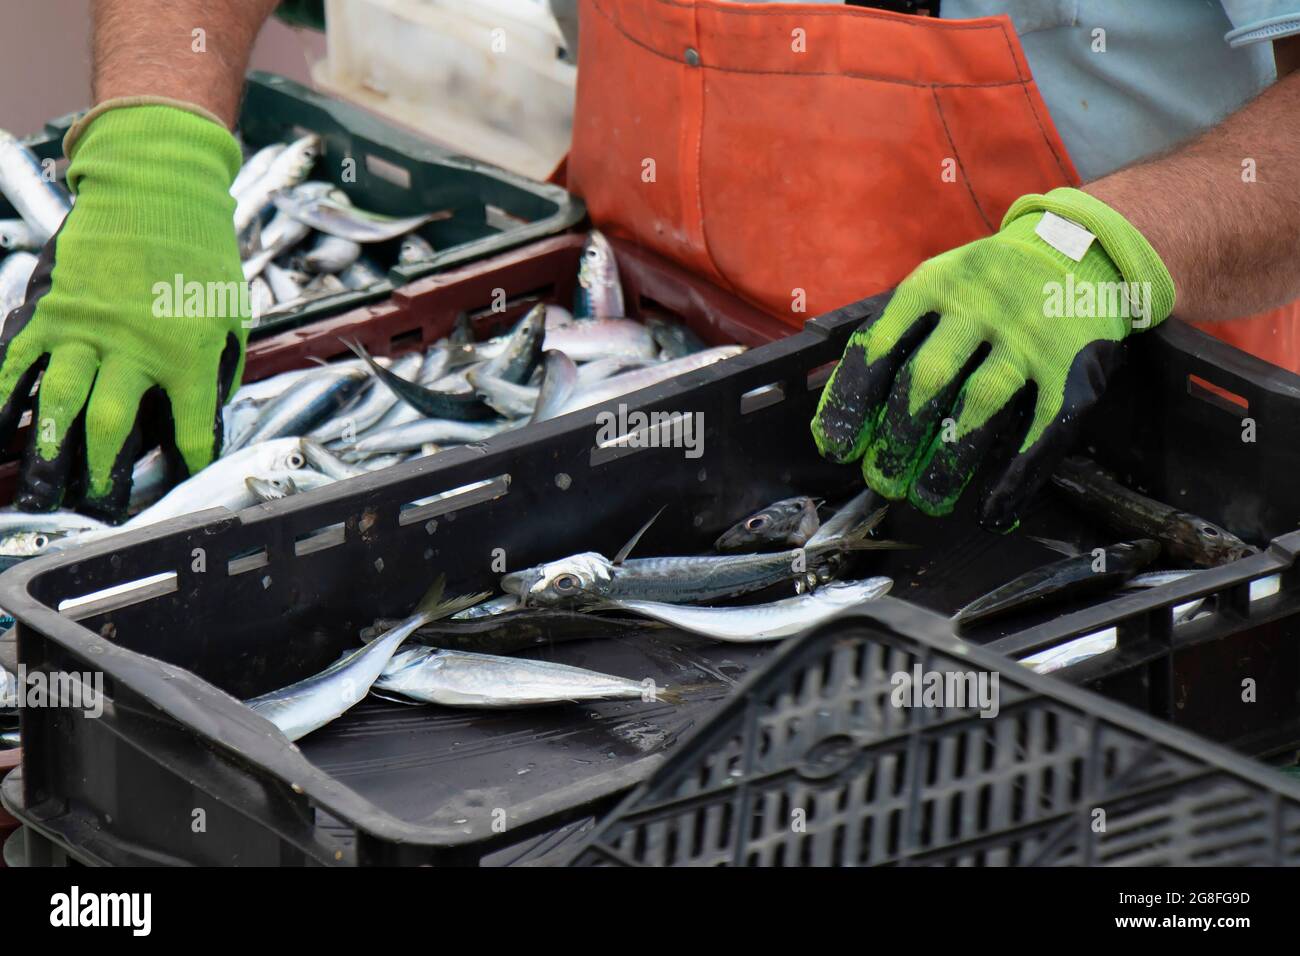 Fisherman sorting out the fish catch in containers, close up of sardines and hands Stock Photo